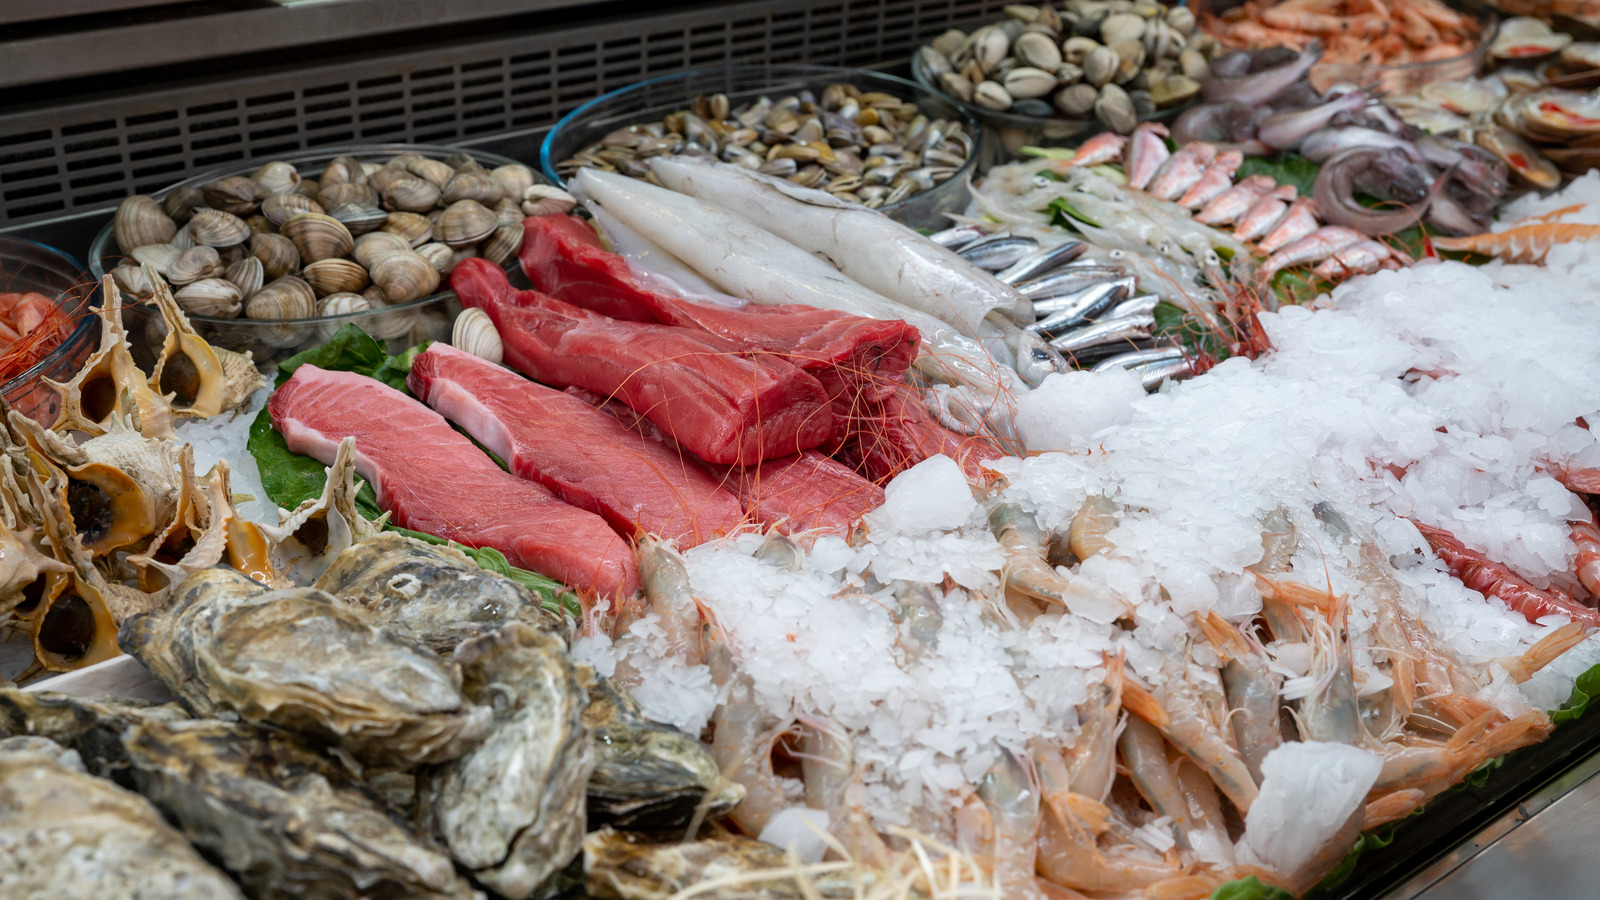 Organic Seafood Market 2023: A Valuation of US$ 2.2 Million Predicted by 2028 | IMARC Group